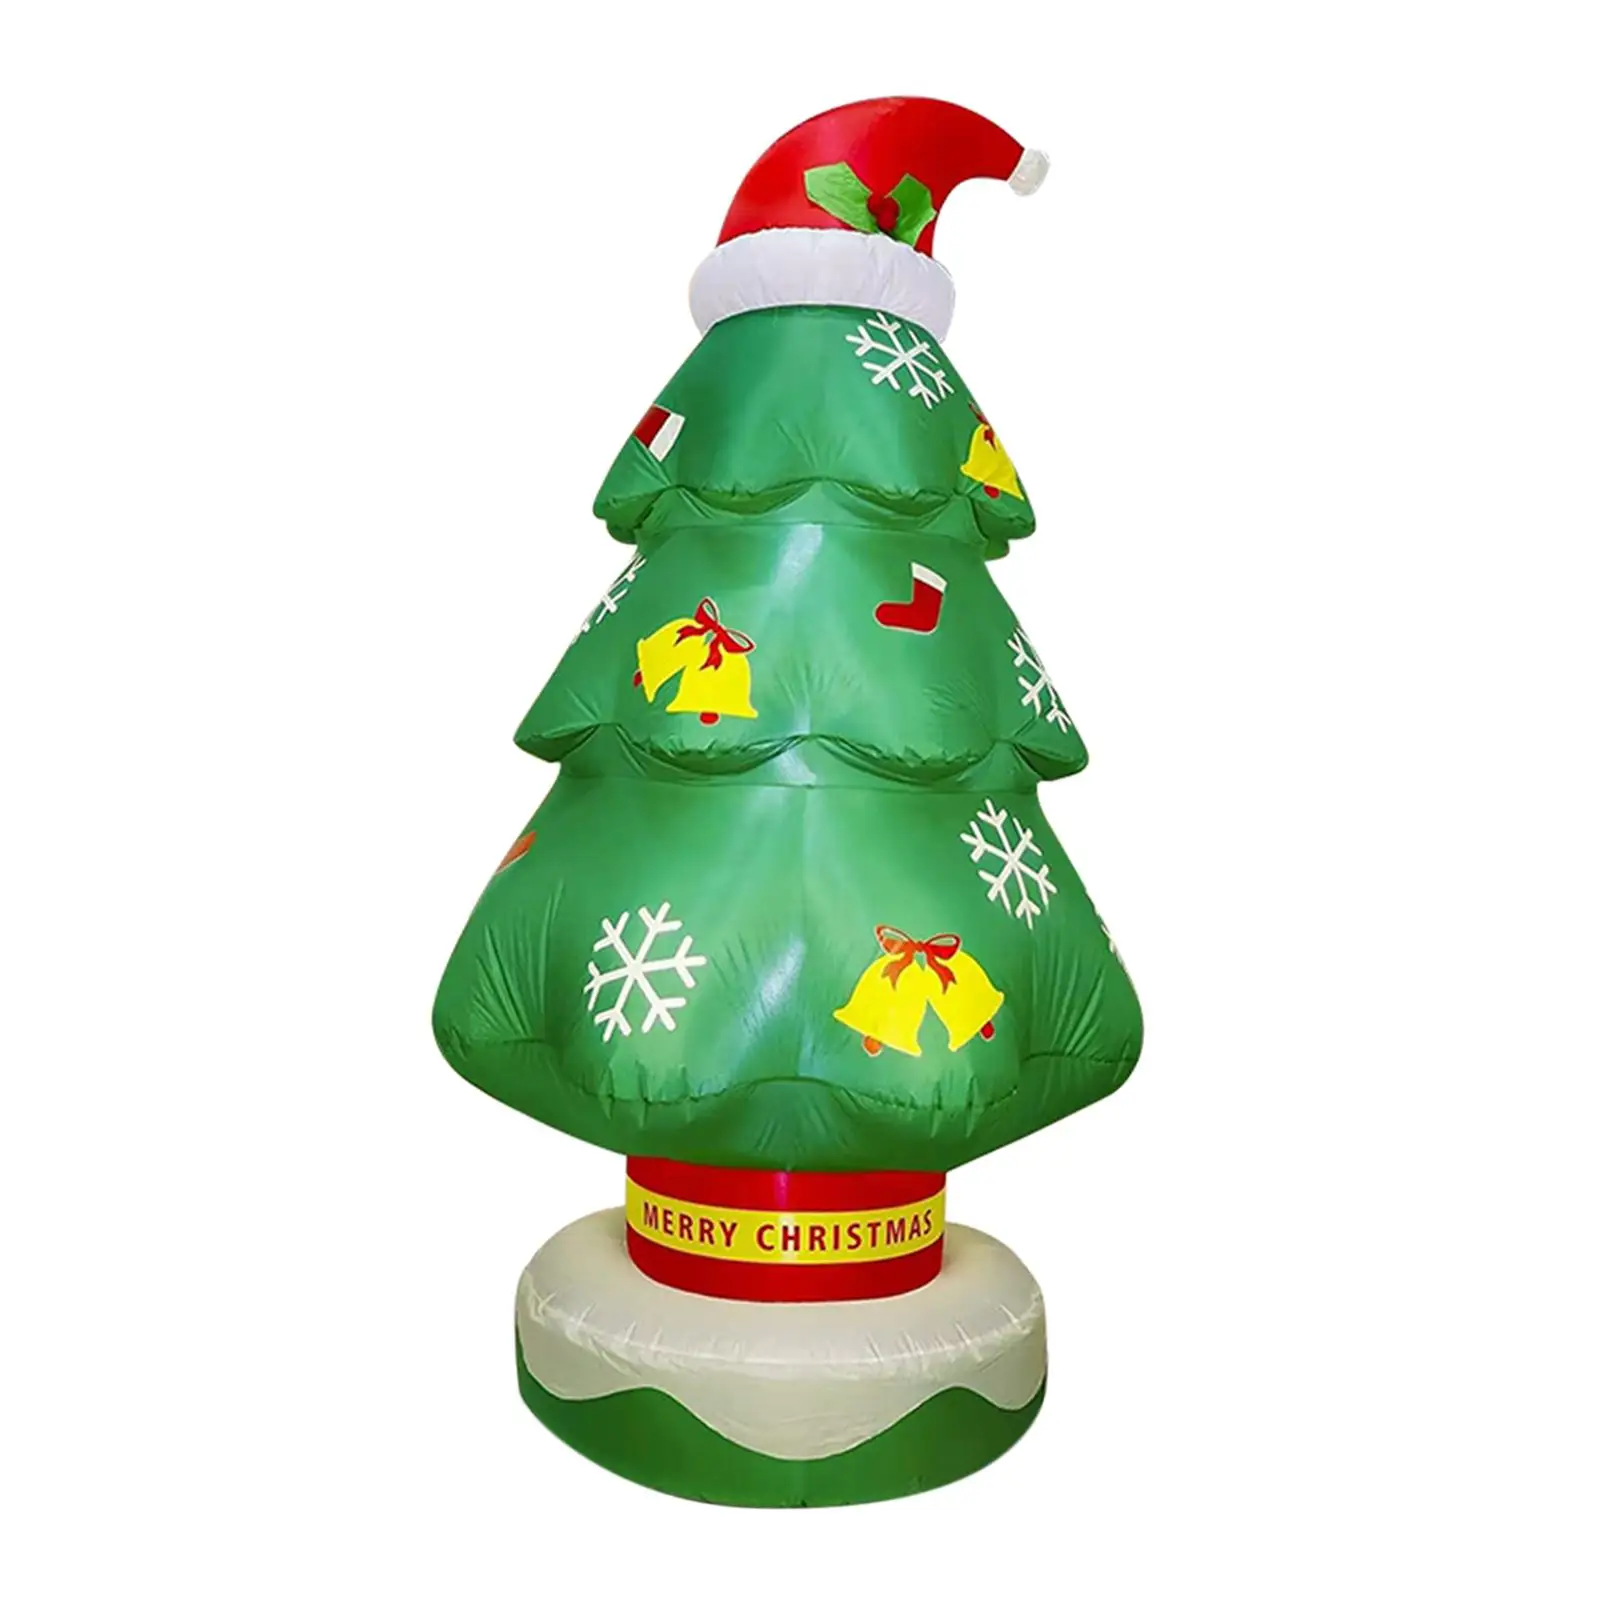 2.1Meters Inflatable Christmas Tree Inflatable Christmas Decoration Luminous Tree for Lawn Holiday Garden Outdoor Party Decor